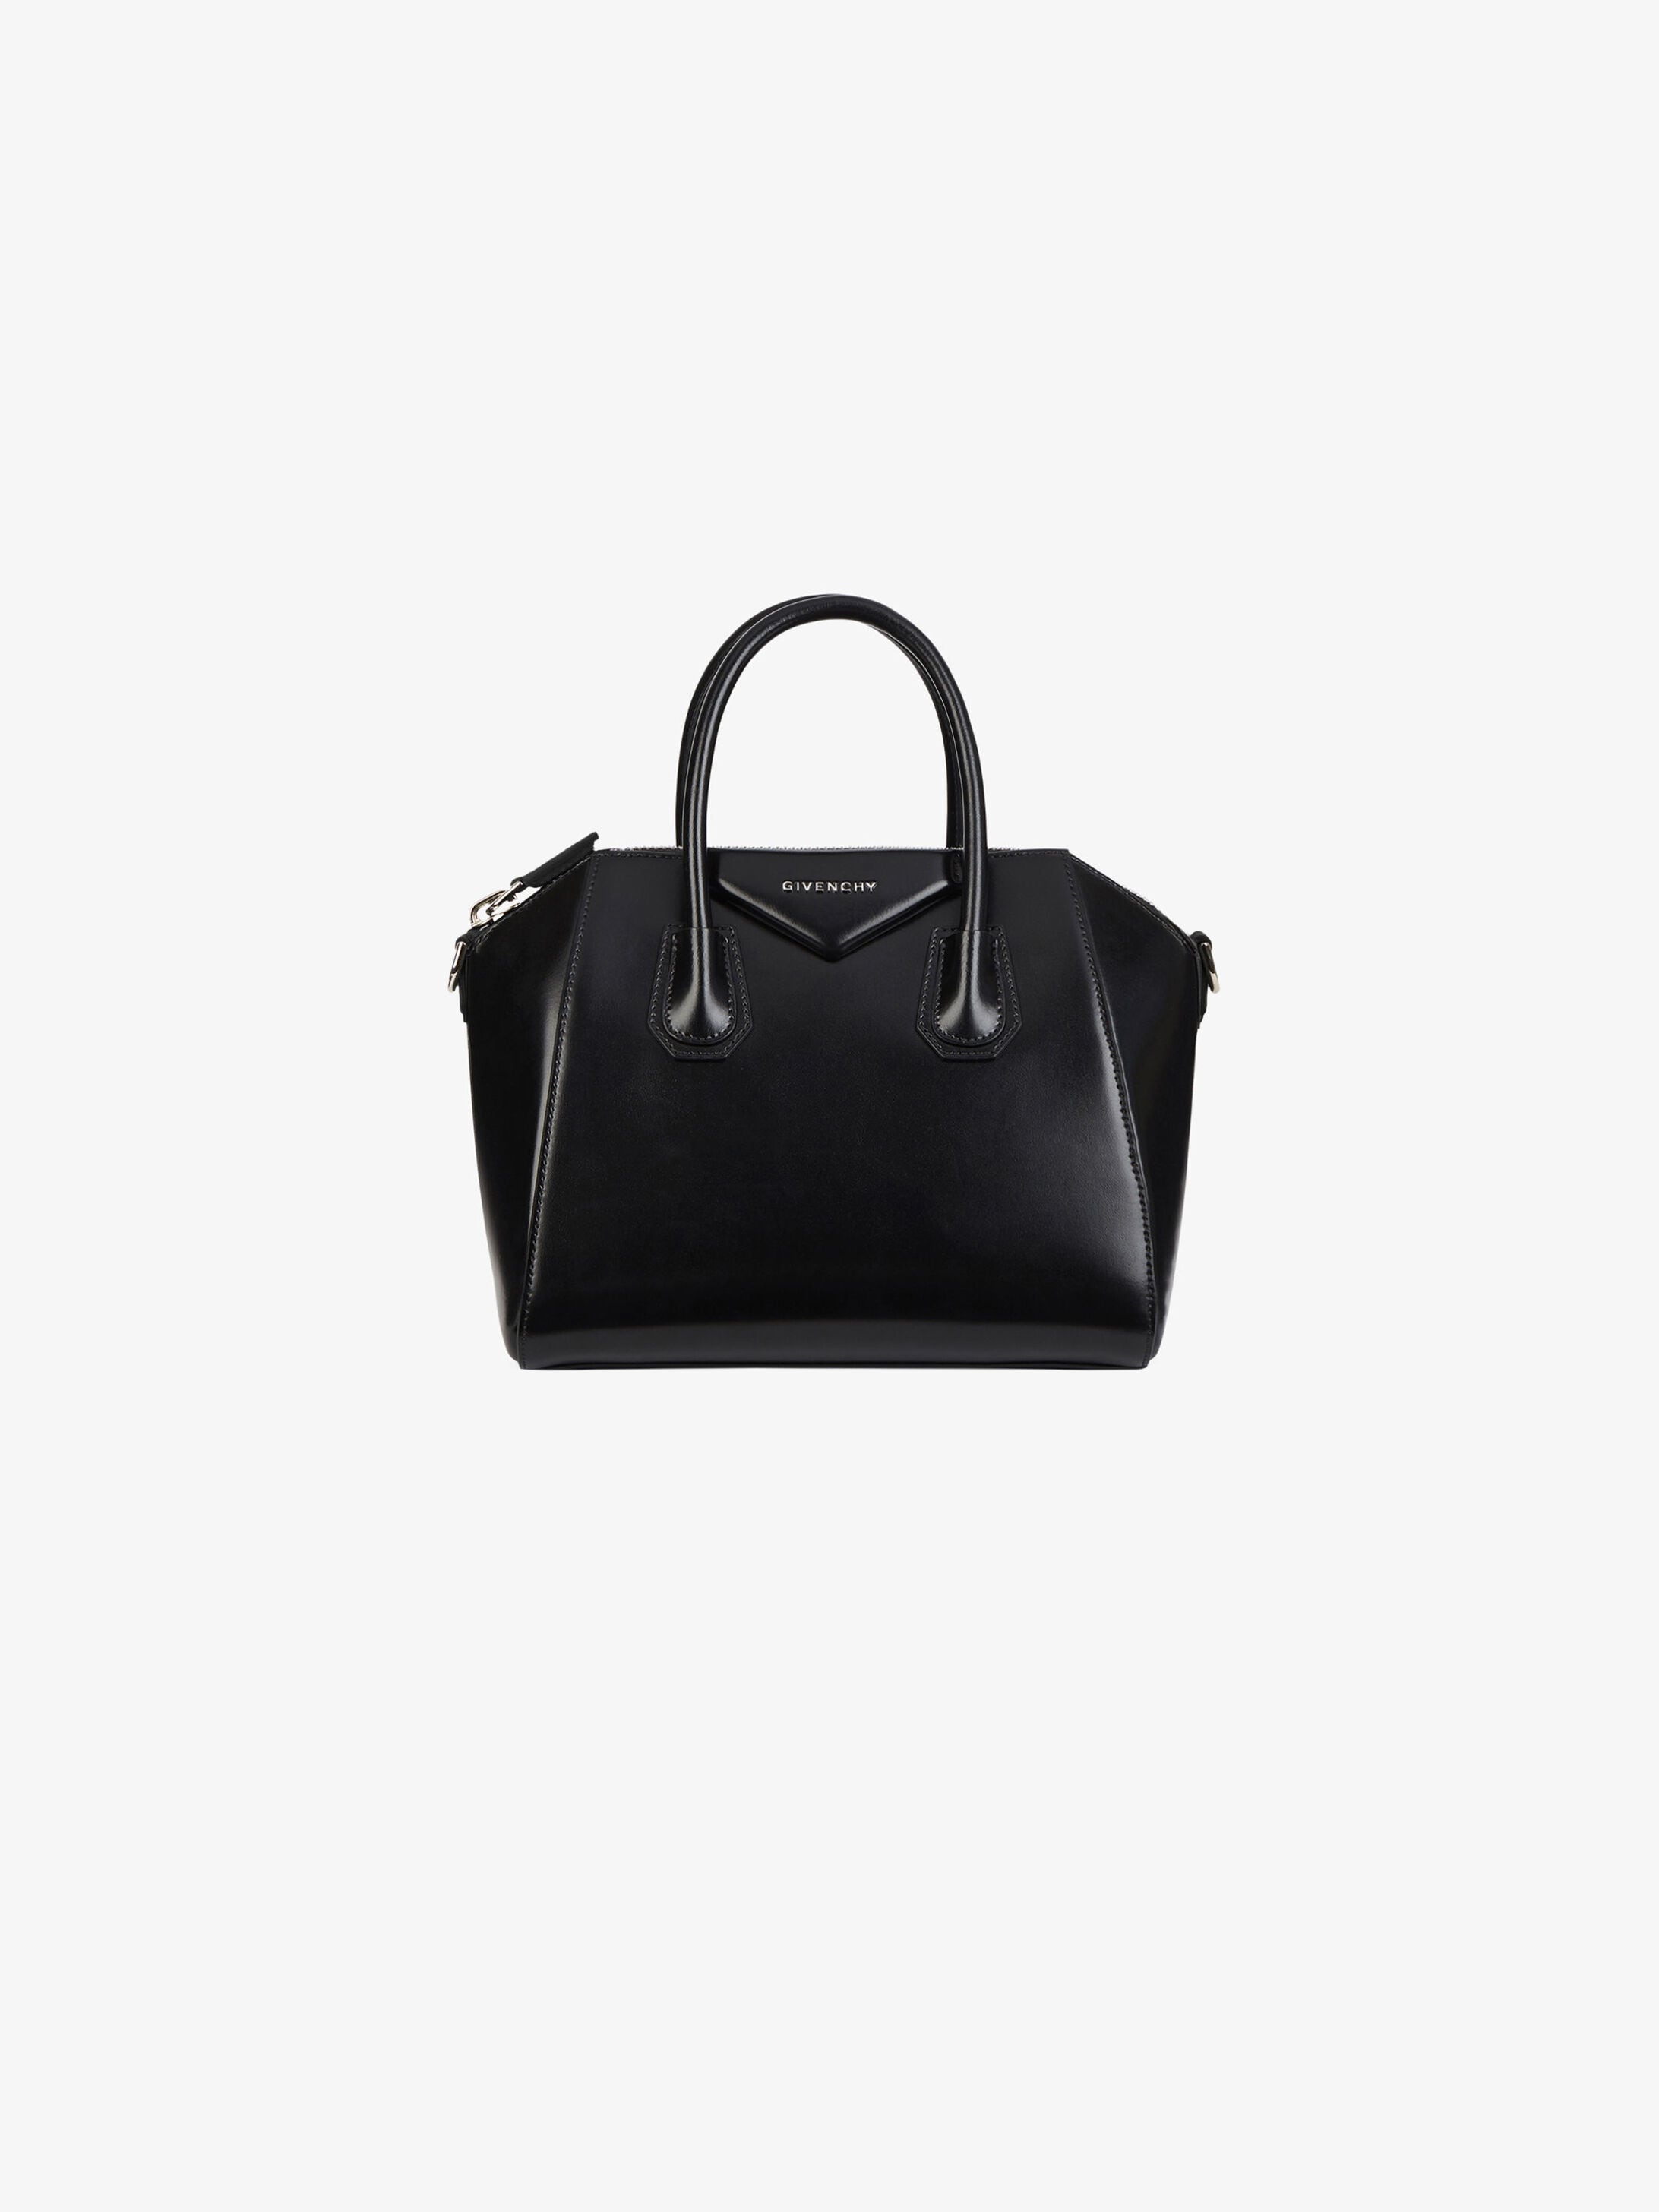 givenchy clutch price